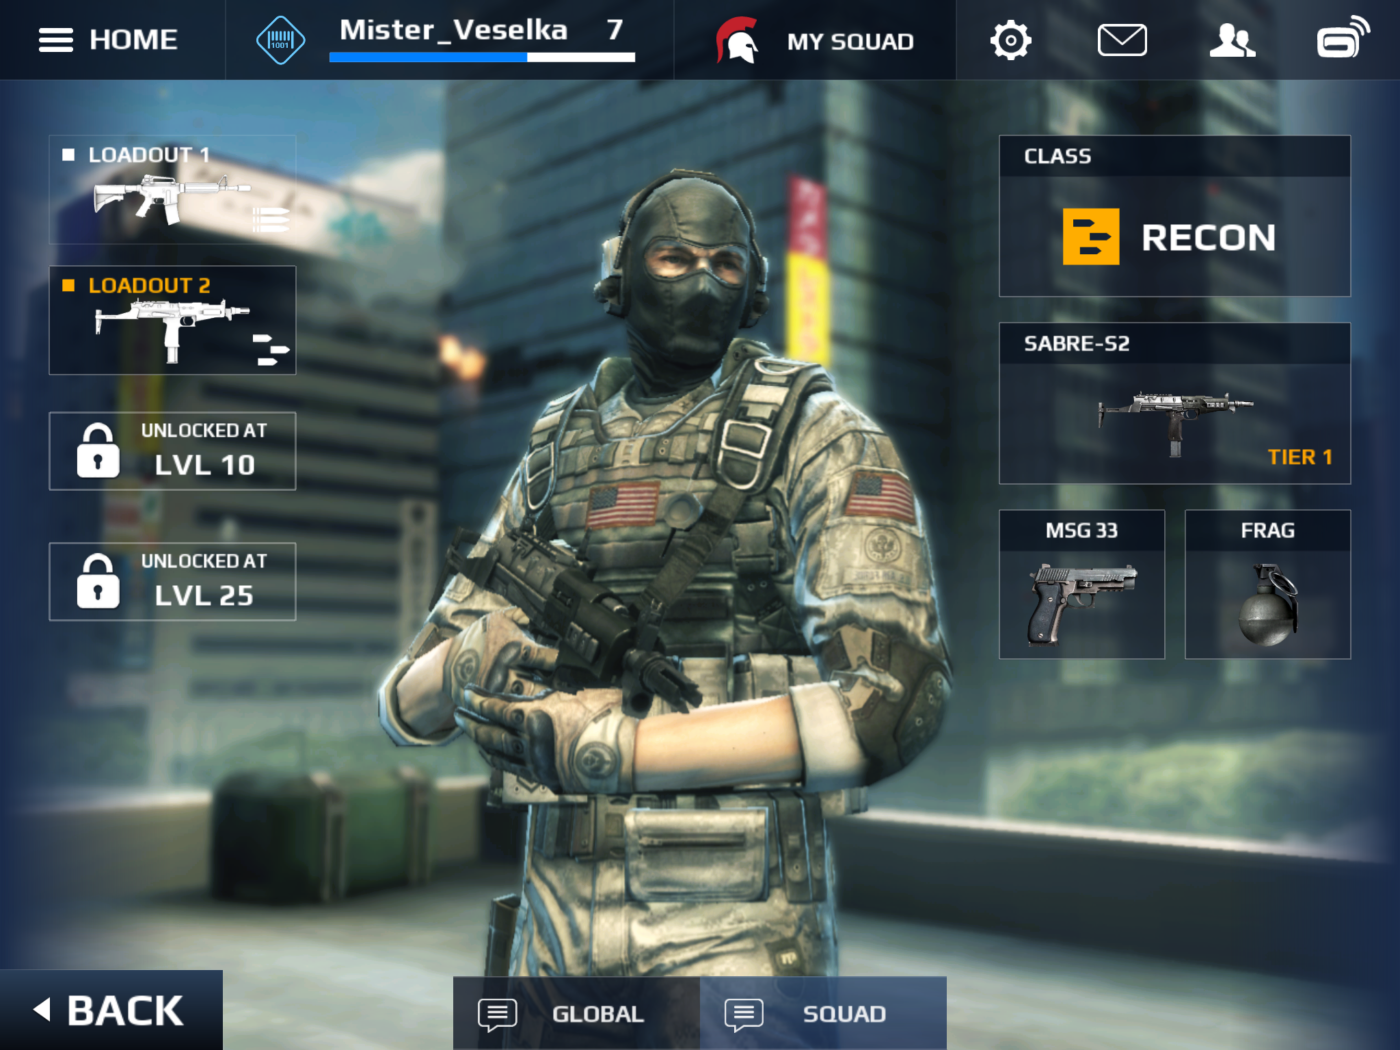 modern combat 5 blackout characters